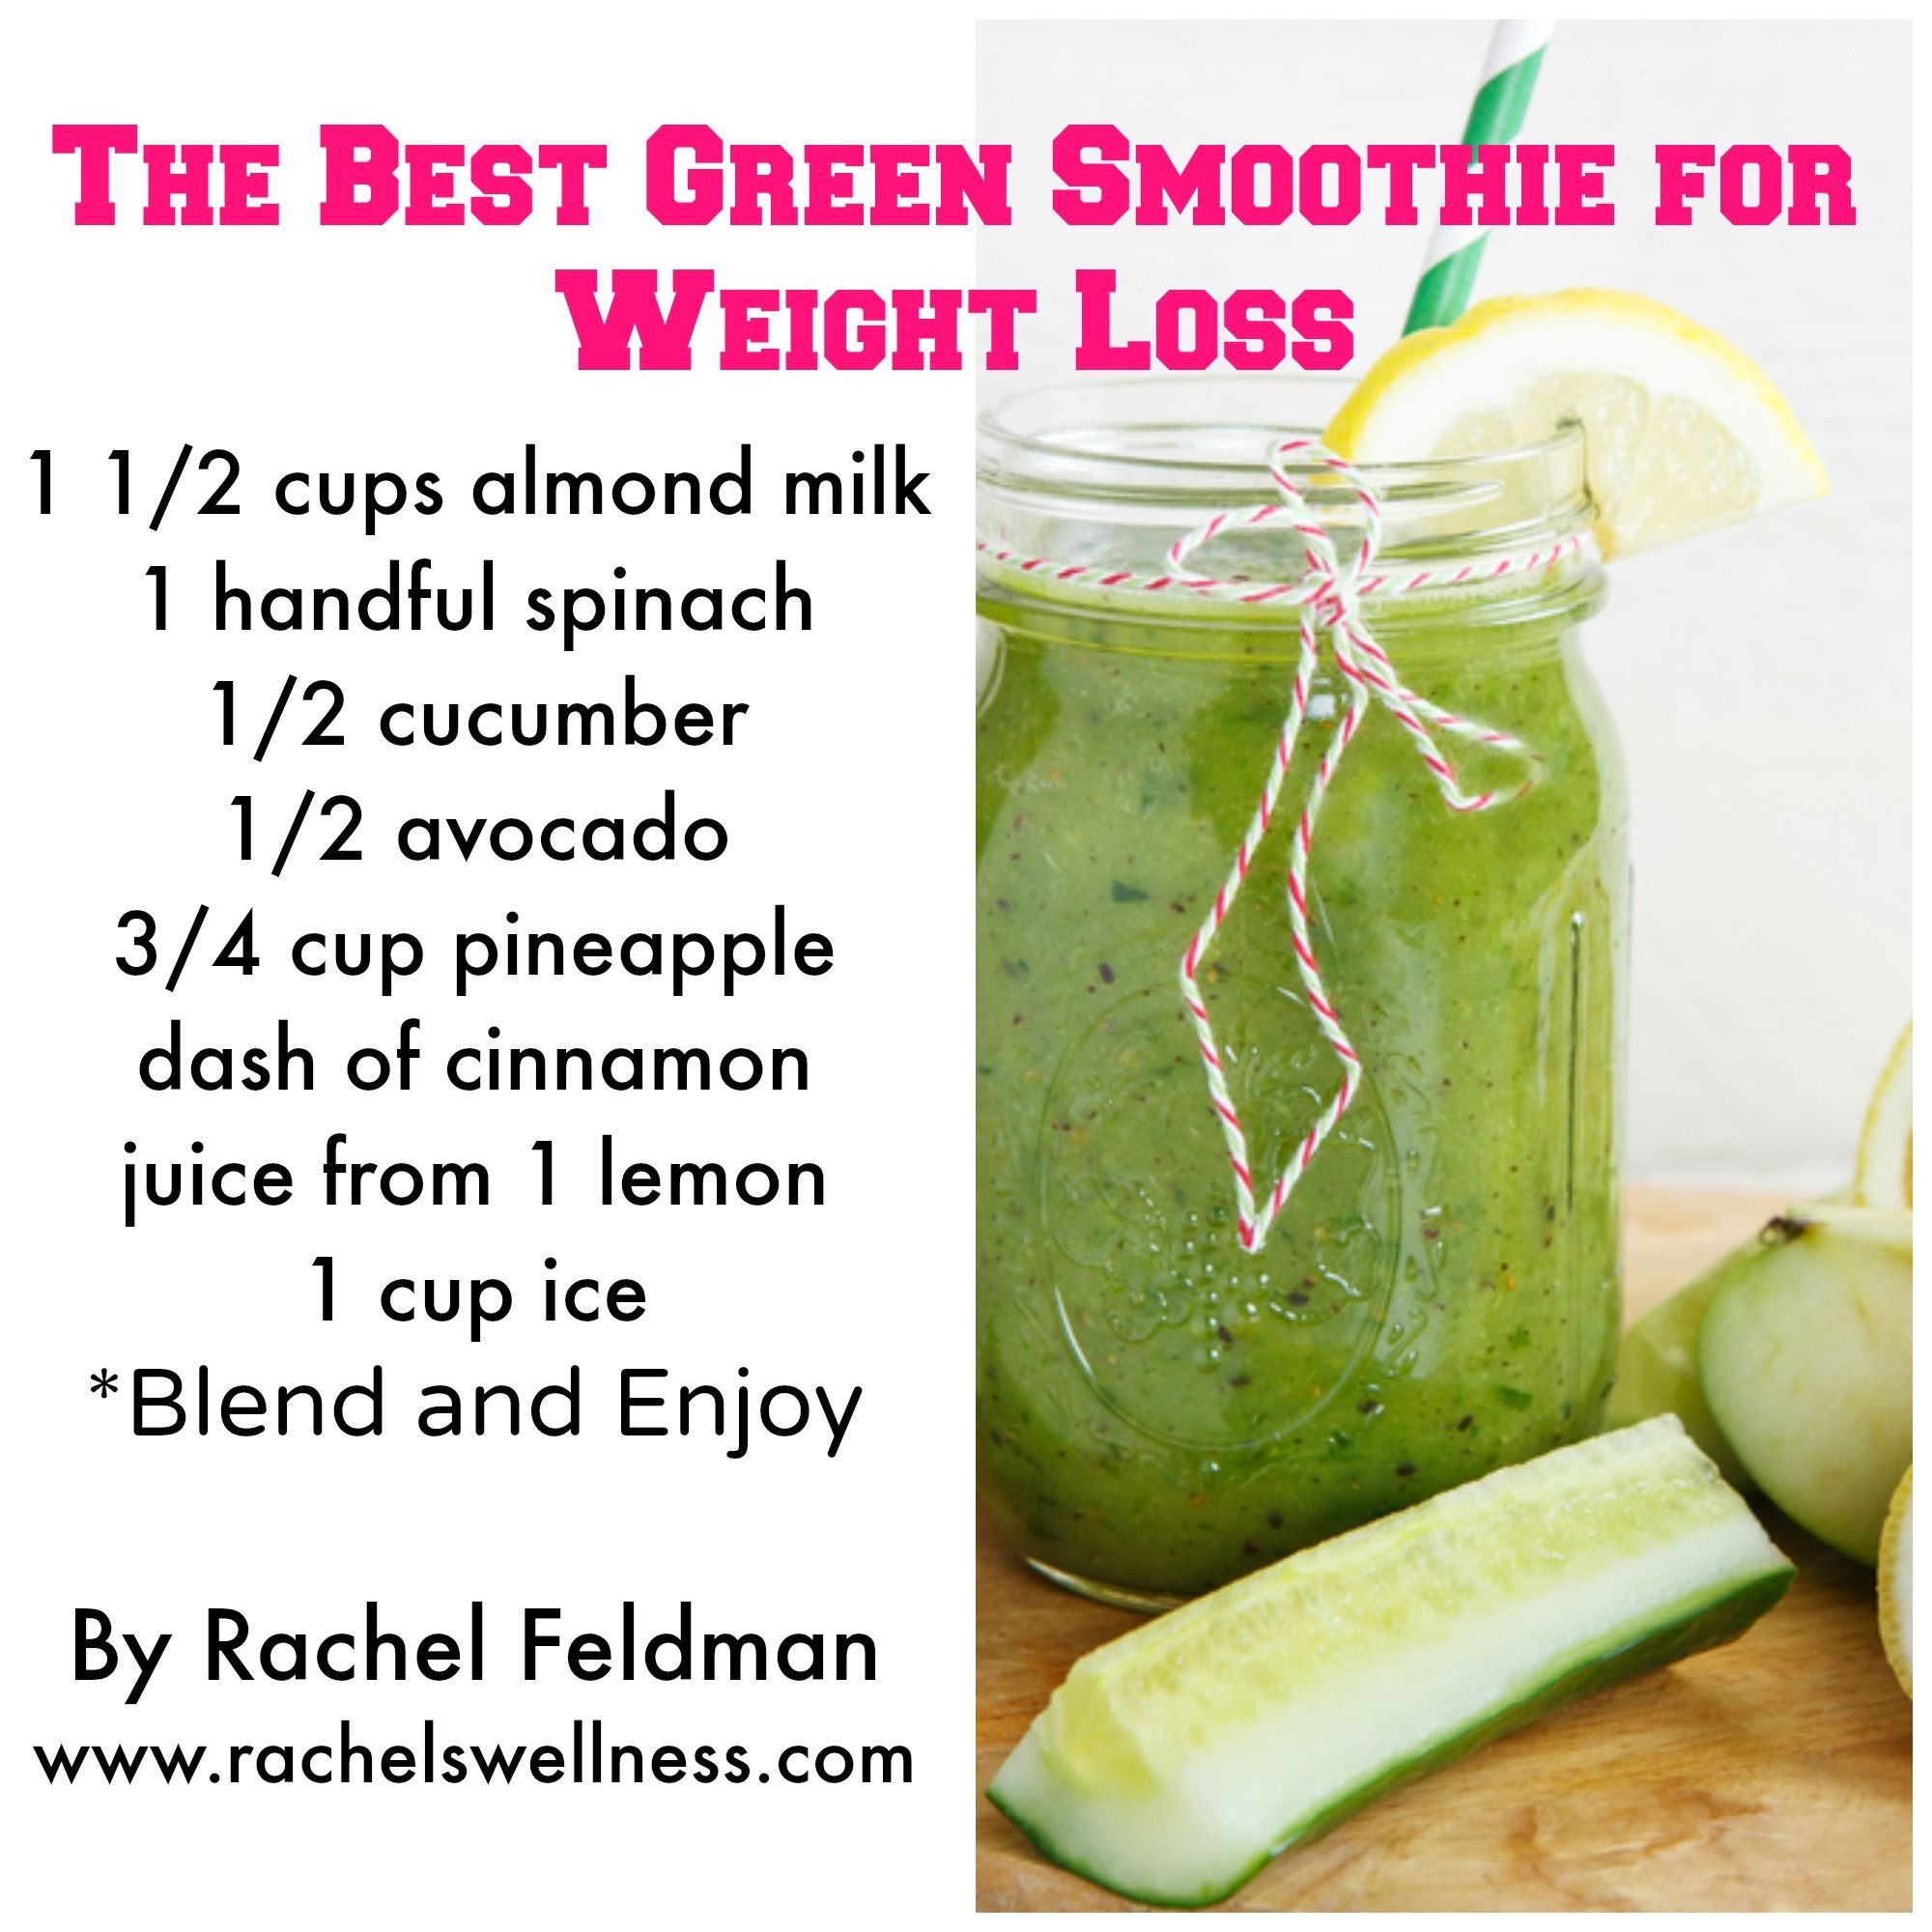 Recipe For Healthy Smoothies For Weight Loss
 cucumber smoothie recipes for weight loss